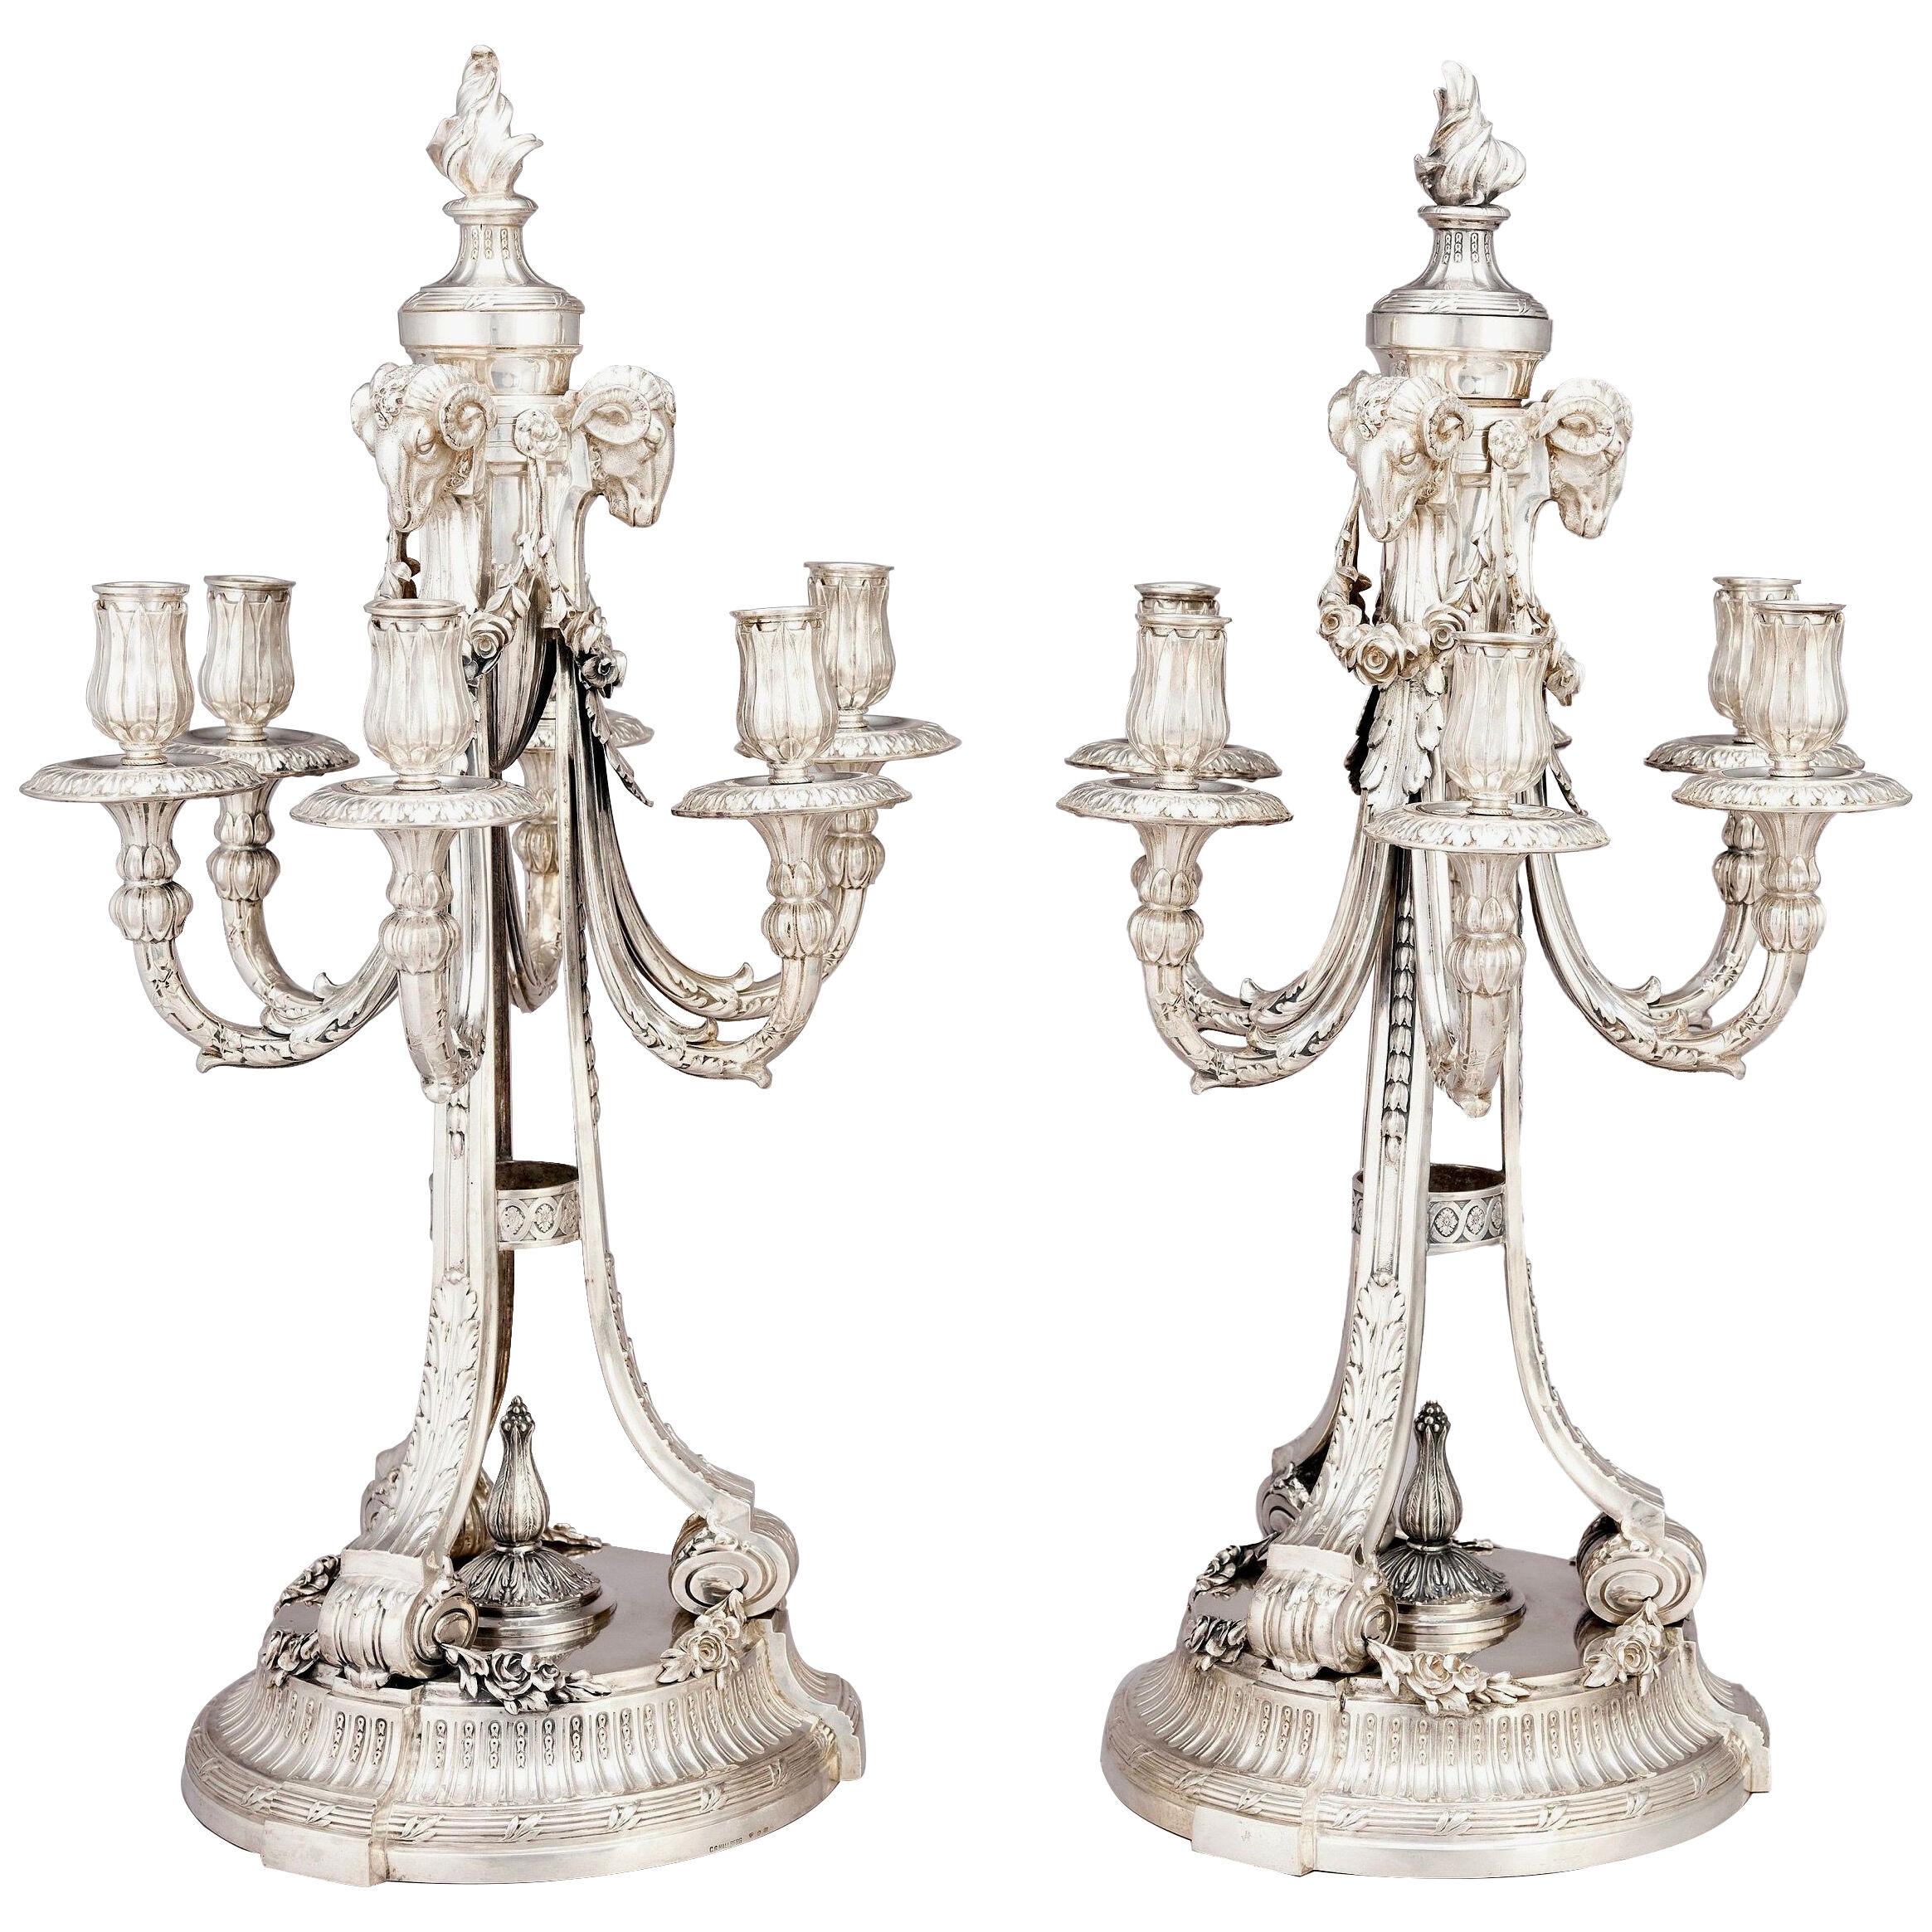 A pair of silver 6-light candelabra made 1907